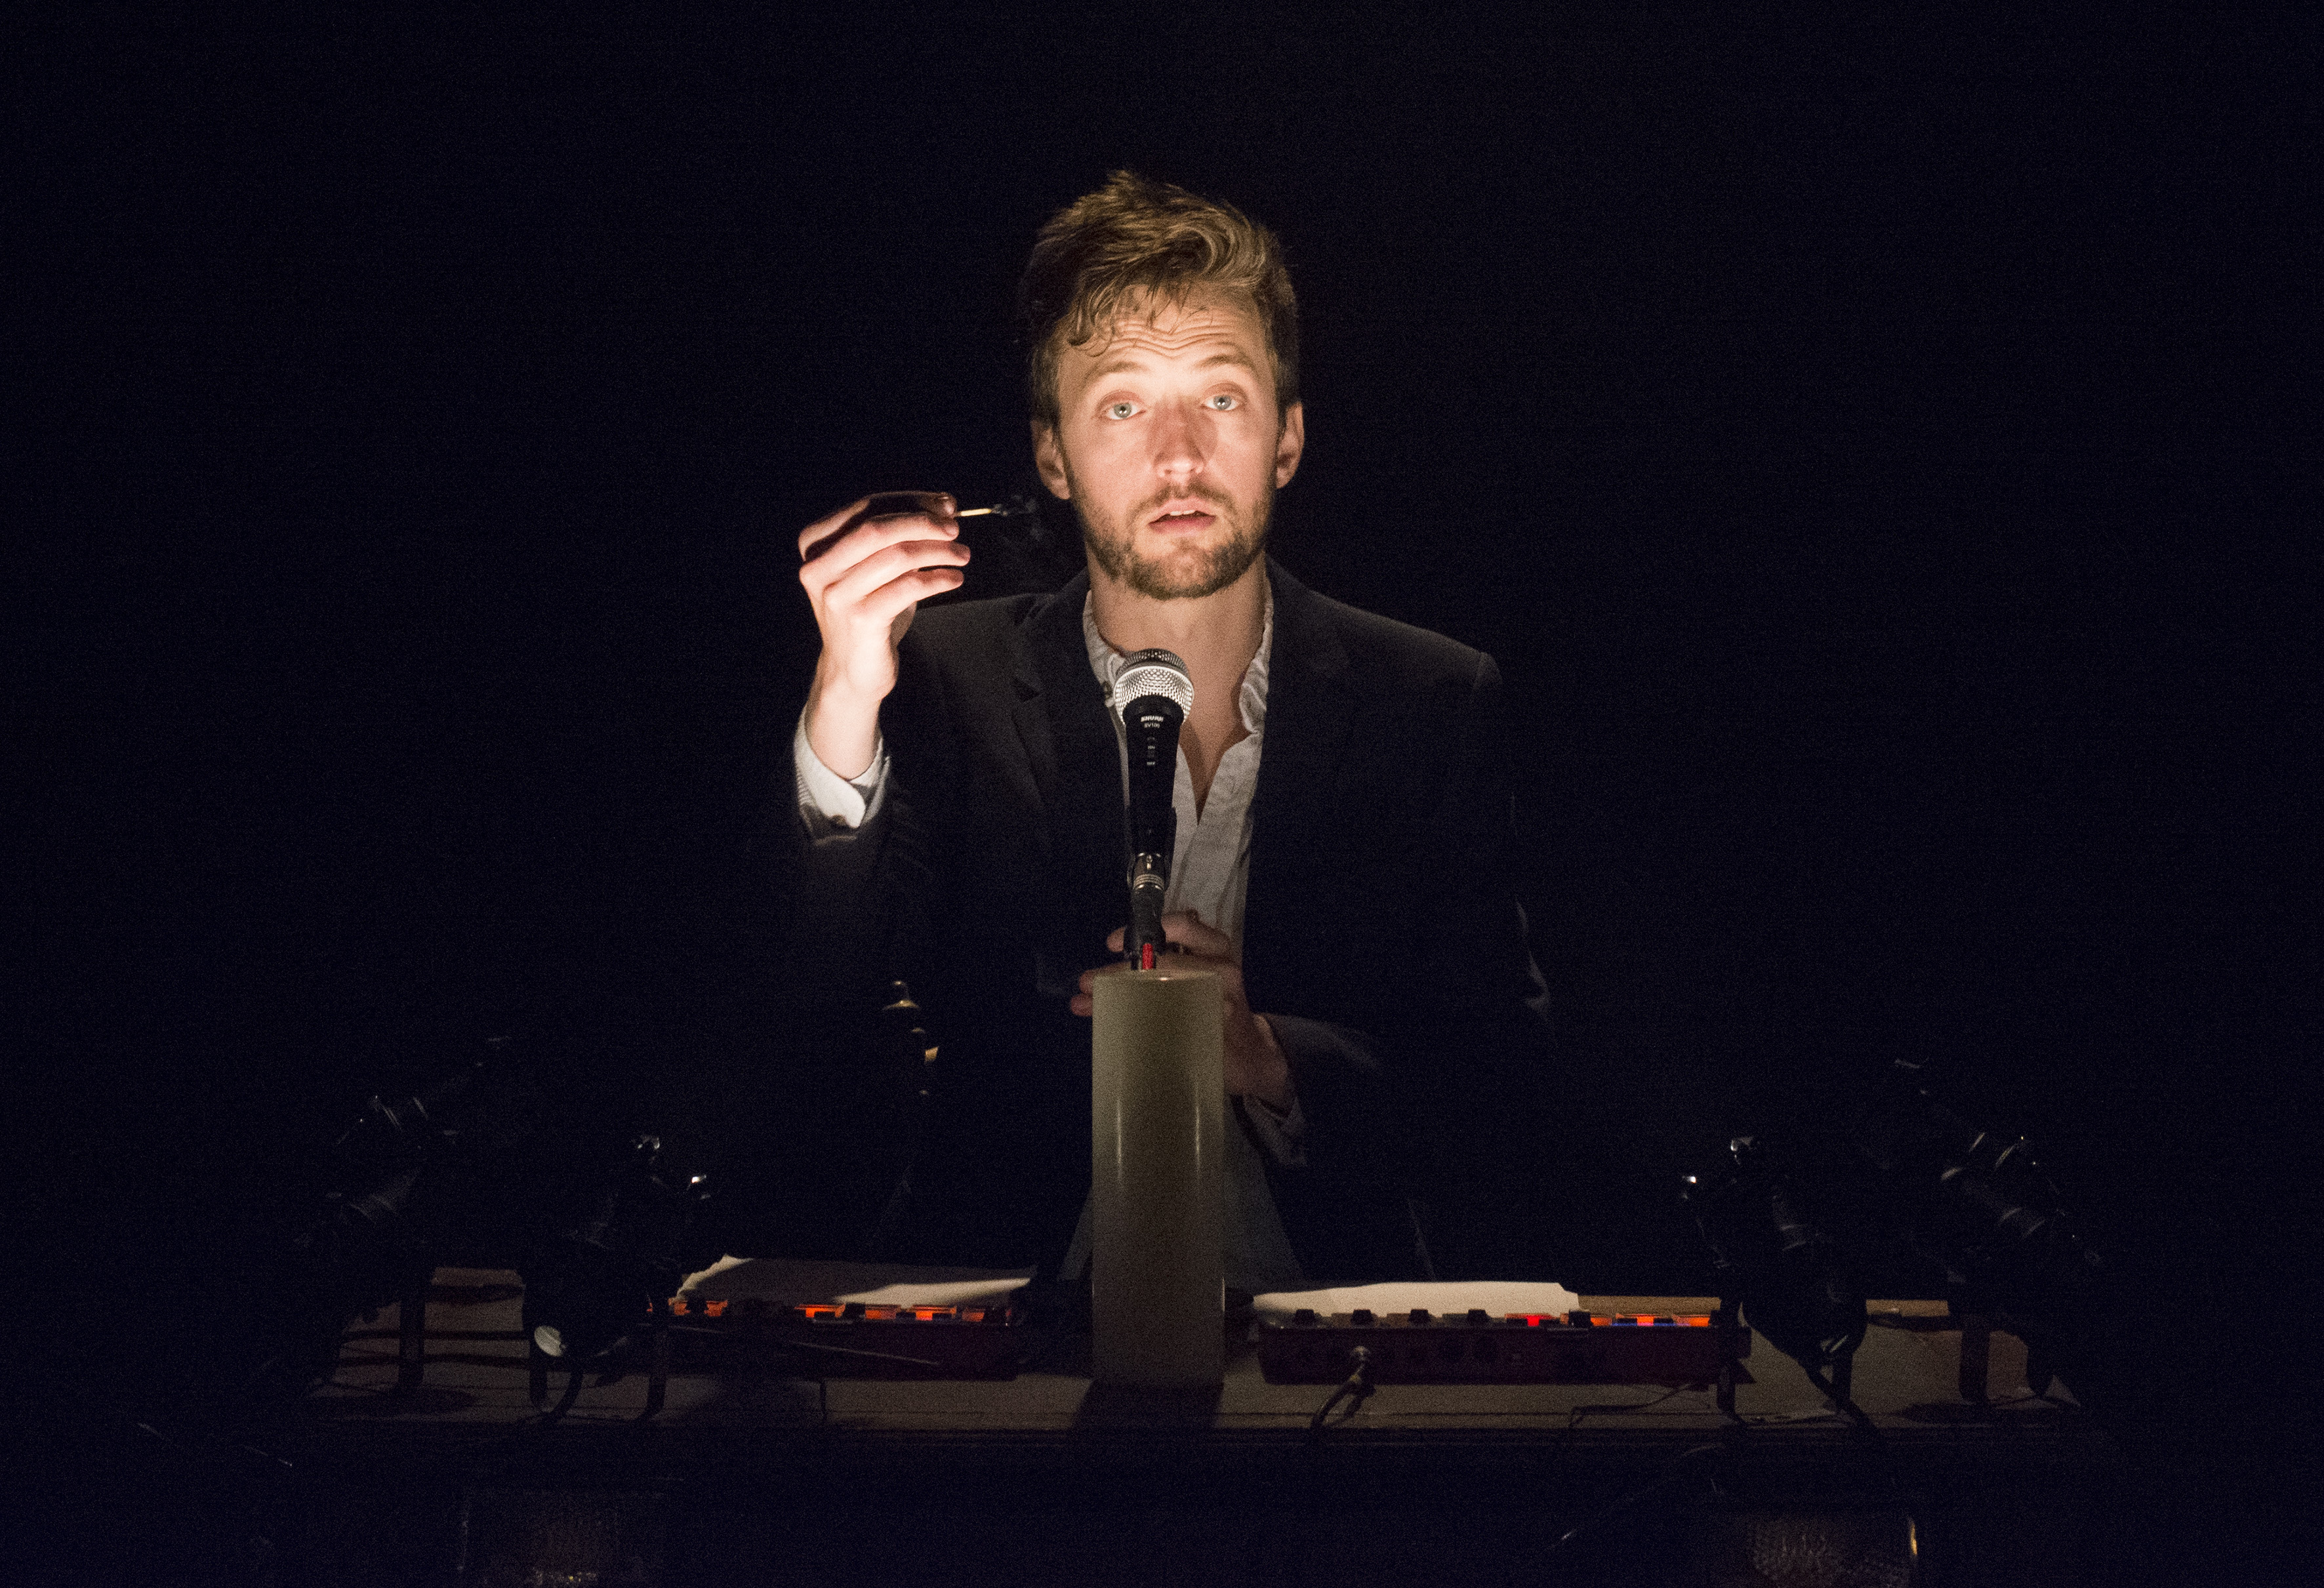 Review: Heads Up at the Marlborough Theatre, Brighton